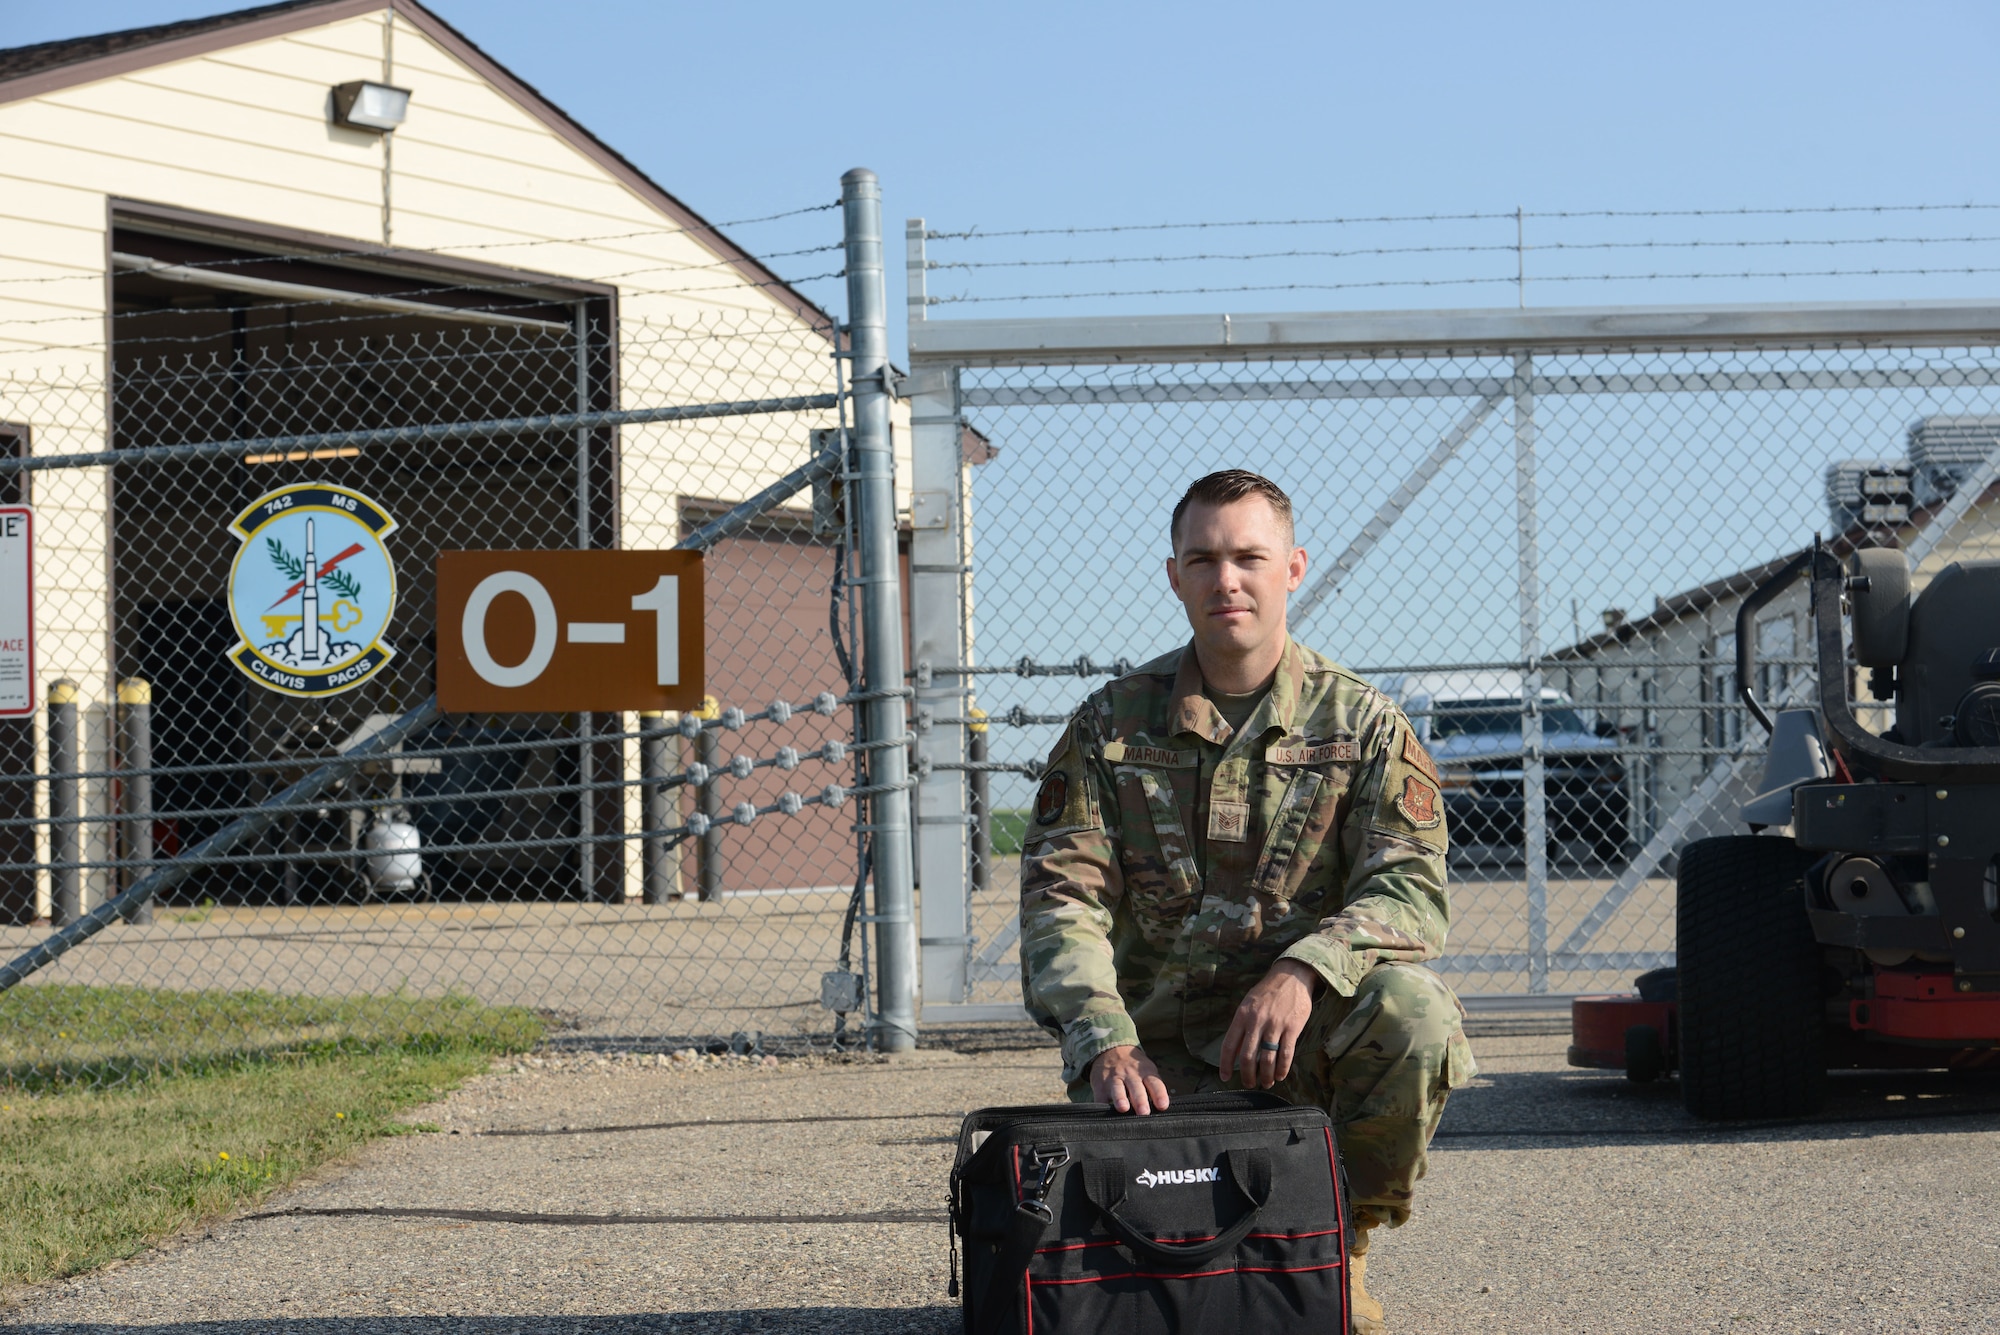 U.S. Air Force Staff Sgt. Edward Maruna, 742nd Missile Squadron facility manager, grabs his tool bag and lawn mower to start maintenance at a missile access facility at Minot Air Force Base, North Dakota, July 7, 2023. Maruna makes sure the MAF is properly functioning and accessible for the 91st Security Forces Squadron to safeguard the site and all of its components. (U.S. Air Force photo by Airman 1st Class Trust Tate)